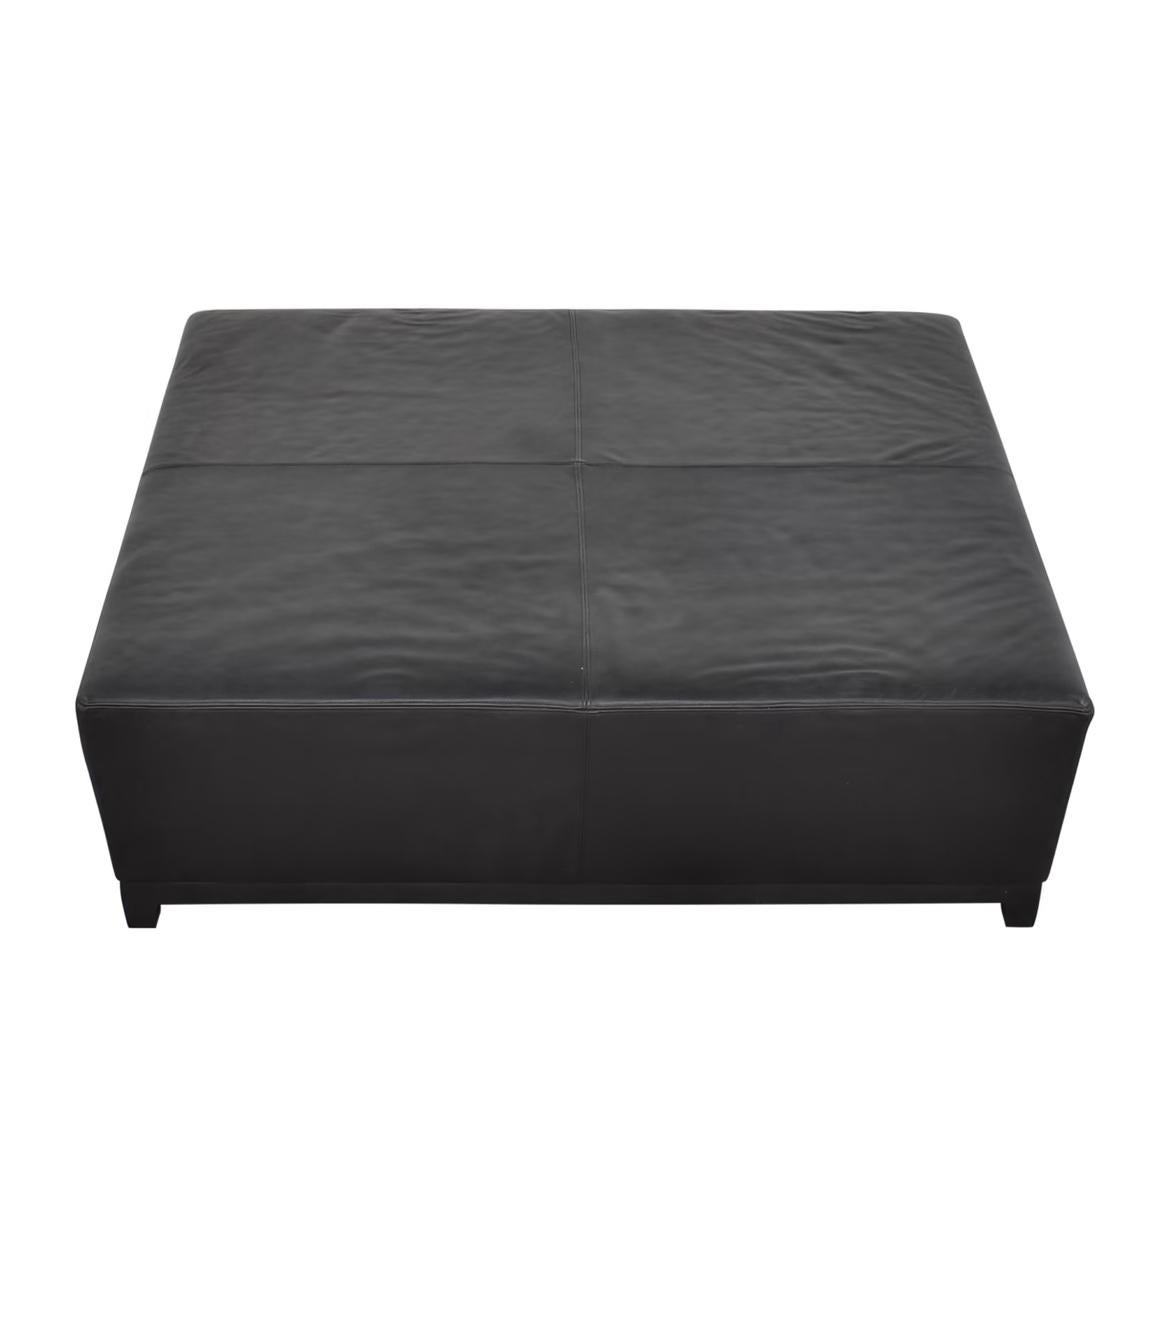 Presenting a huge seating or cocktail table option for home or office. Creamy black leather. Beautiful minimalist design by Christian Liaigre for A. Rudin. 


Located in Philadelphia 

Custom shipping quotes available 


For four generations, A.